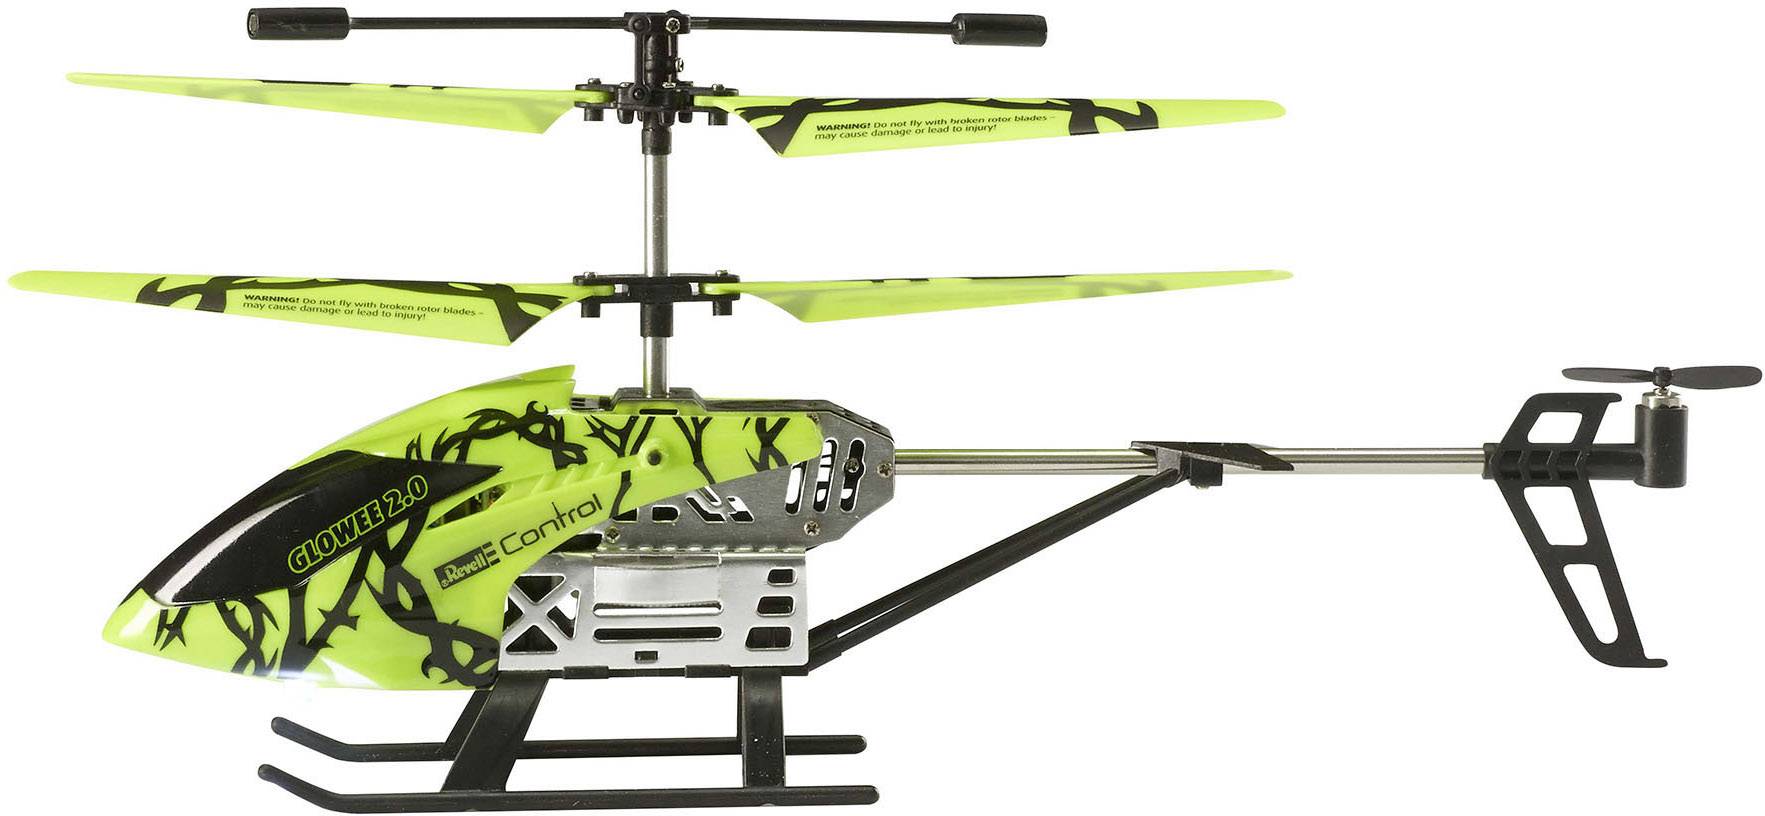 revell control glowee 2.0 helicopter